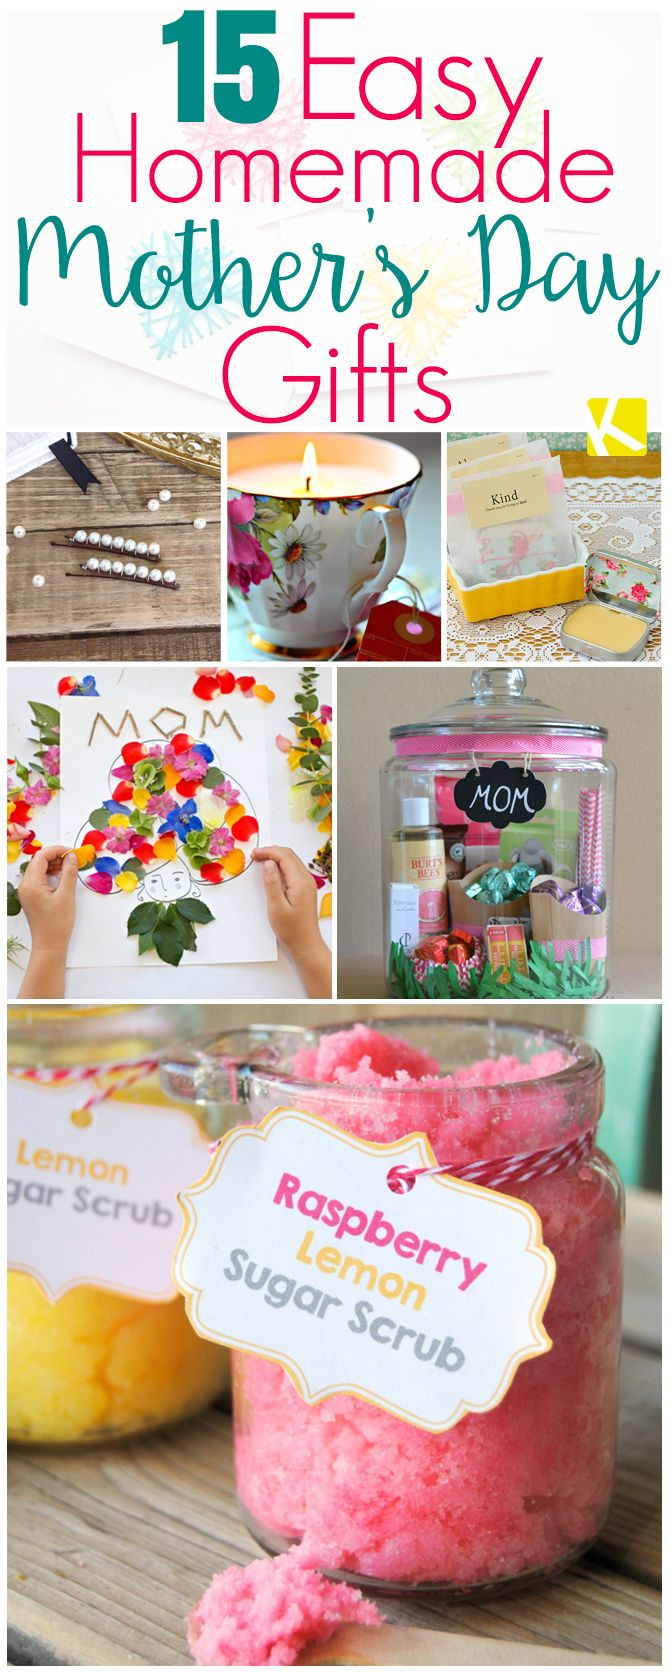 Easy Diy Mother's Day Gifts
 15 Mother’s Day Gifts That Are Ridiculously Easy to Make